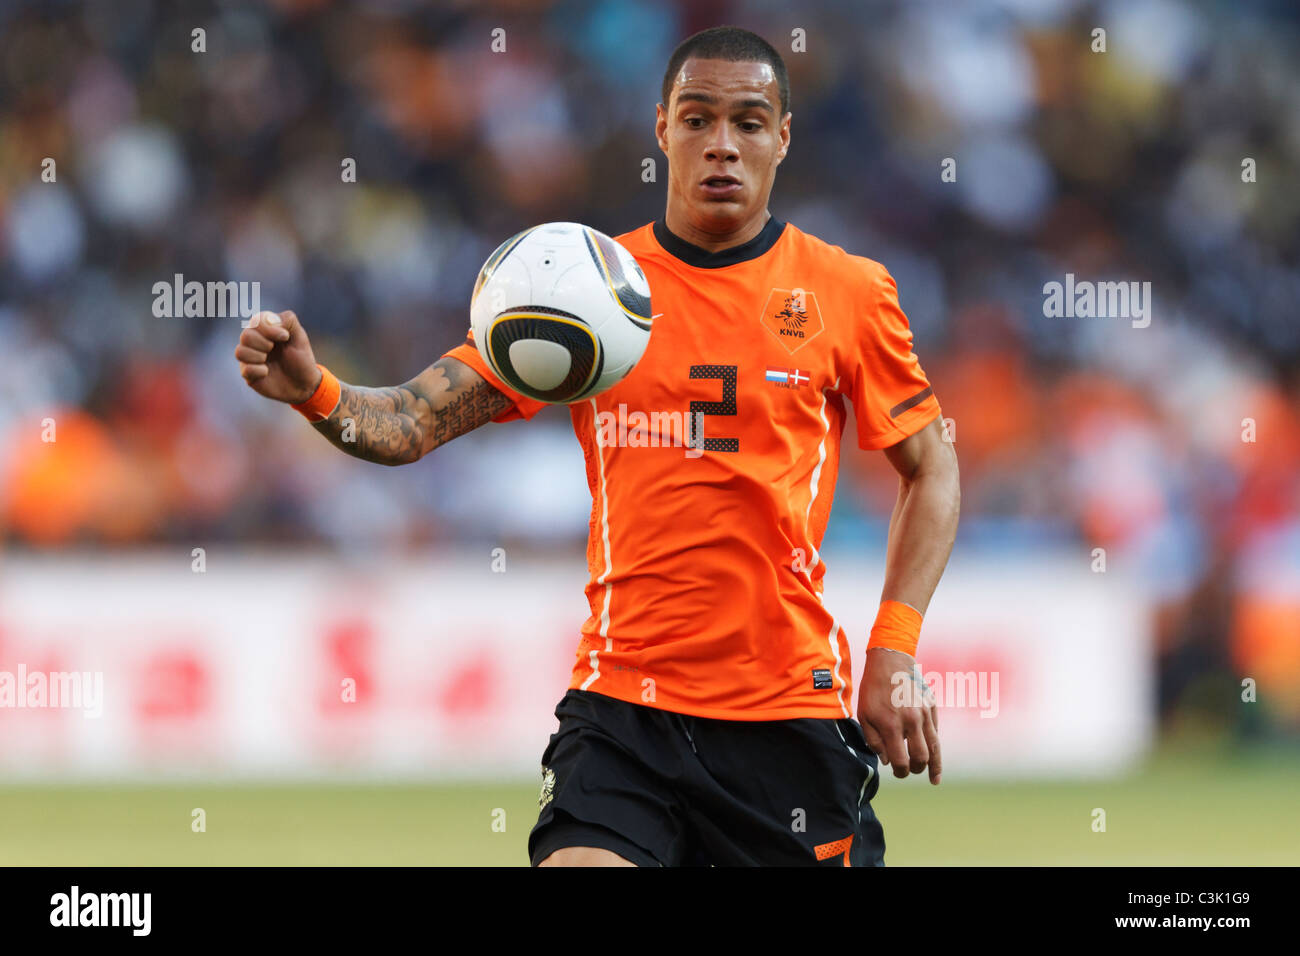 Dutch Gregory van der Wiel during the 2010 FIFA World Cup group E match  between the Netherlands and Denmark at Soccer City stadium in Johannesburg,  South Africa, 14 June 2010. Netherlands won